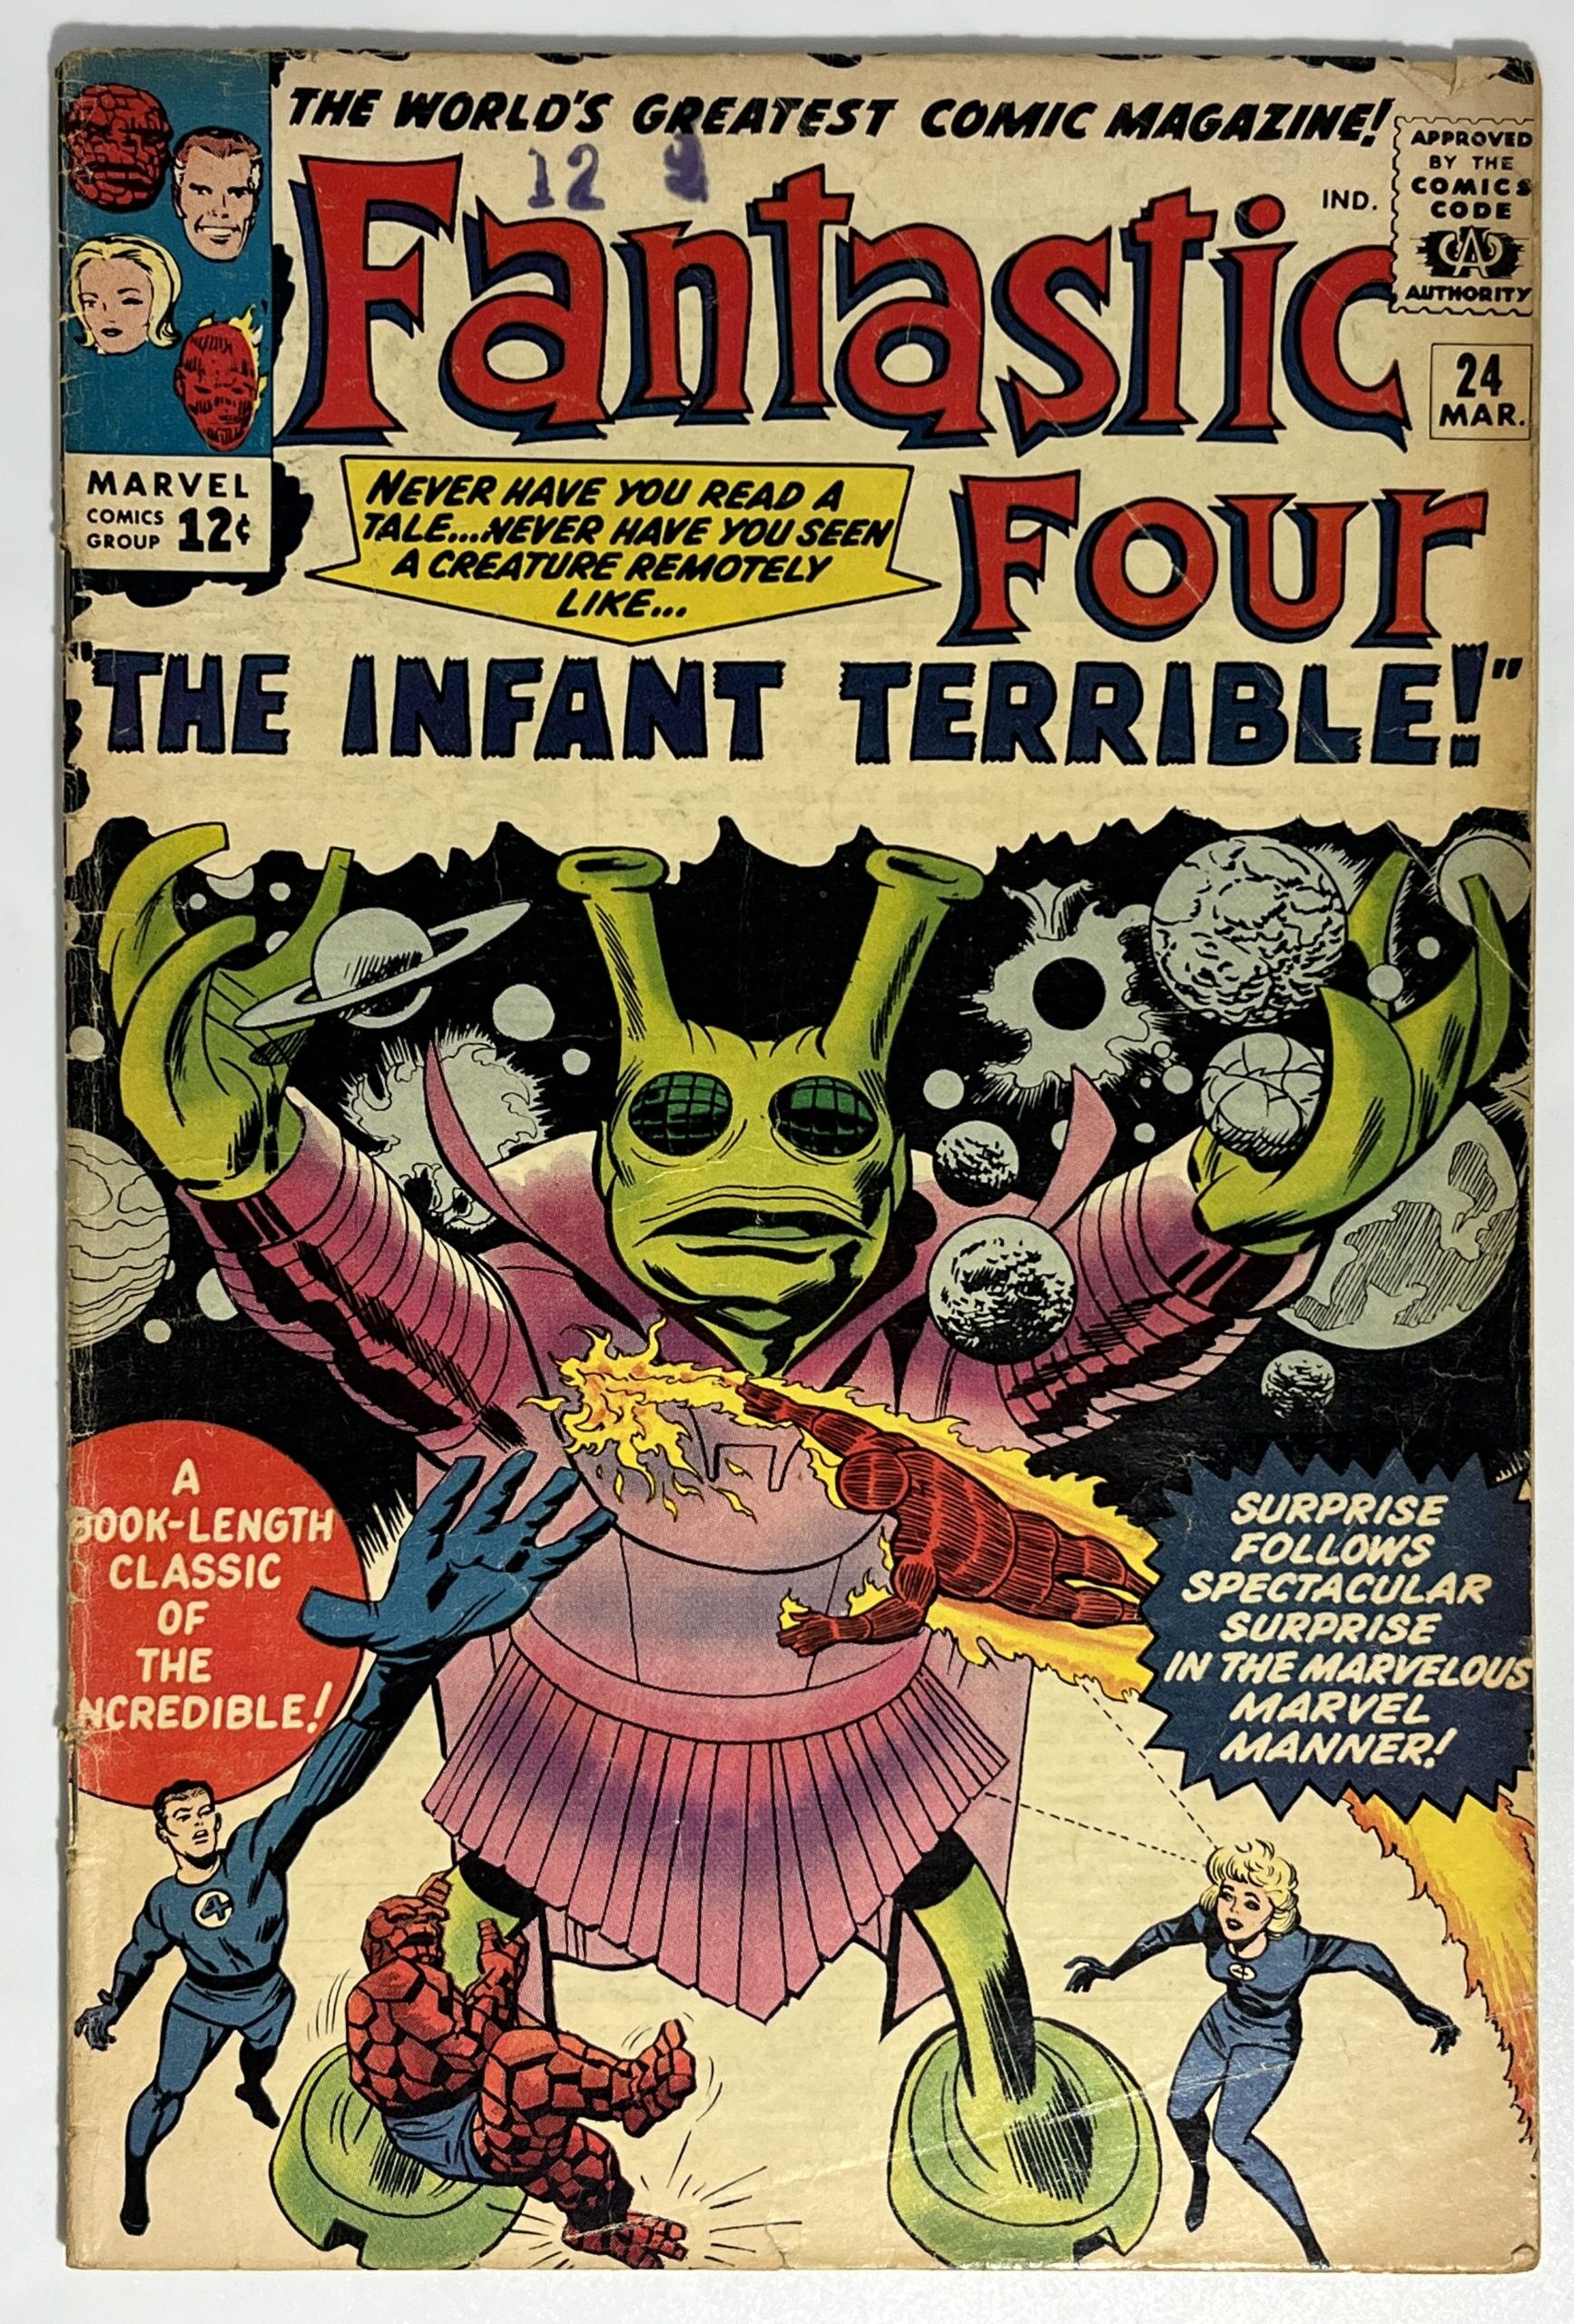 Fantastic Four #24 (1963) in 4.0 Very Good